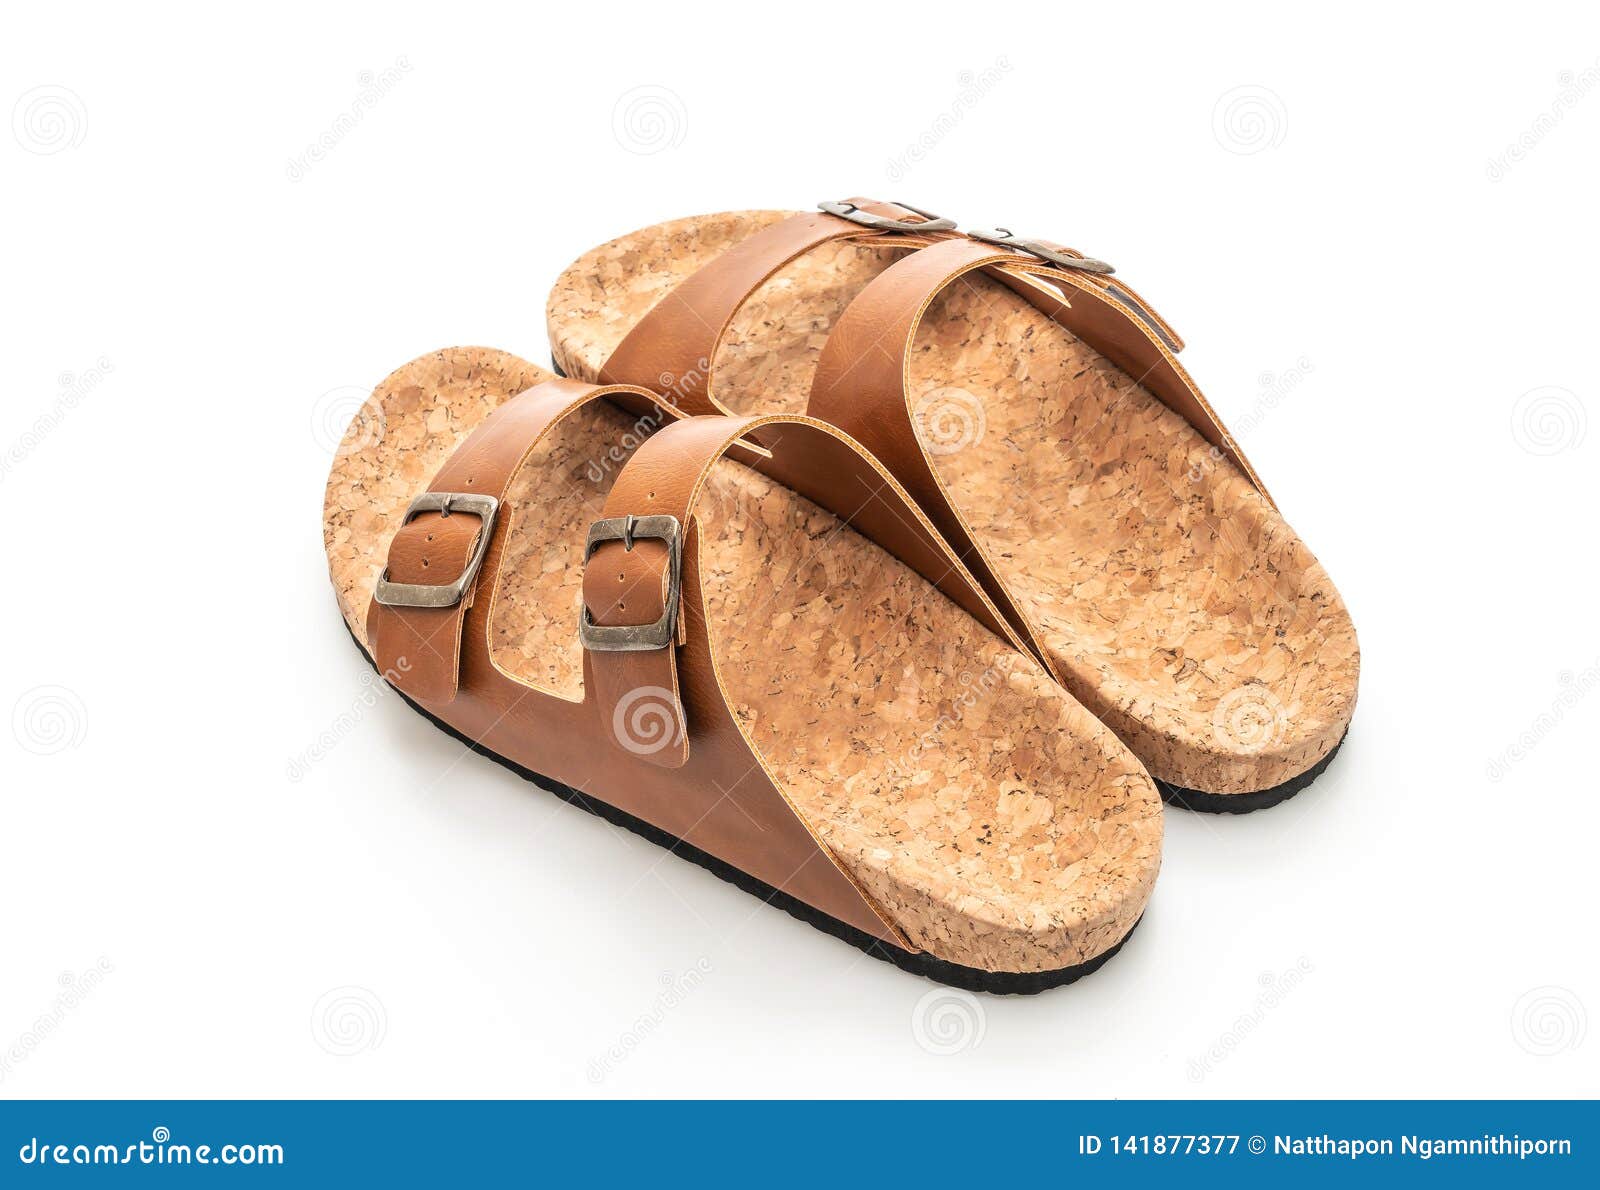 Men S and Women S (unisex) Fashion Leather Sandals Stock Image - Image ...